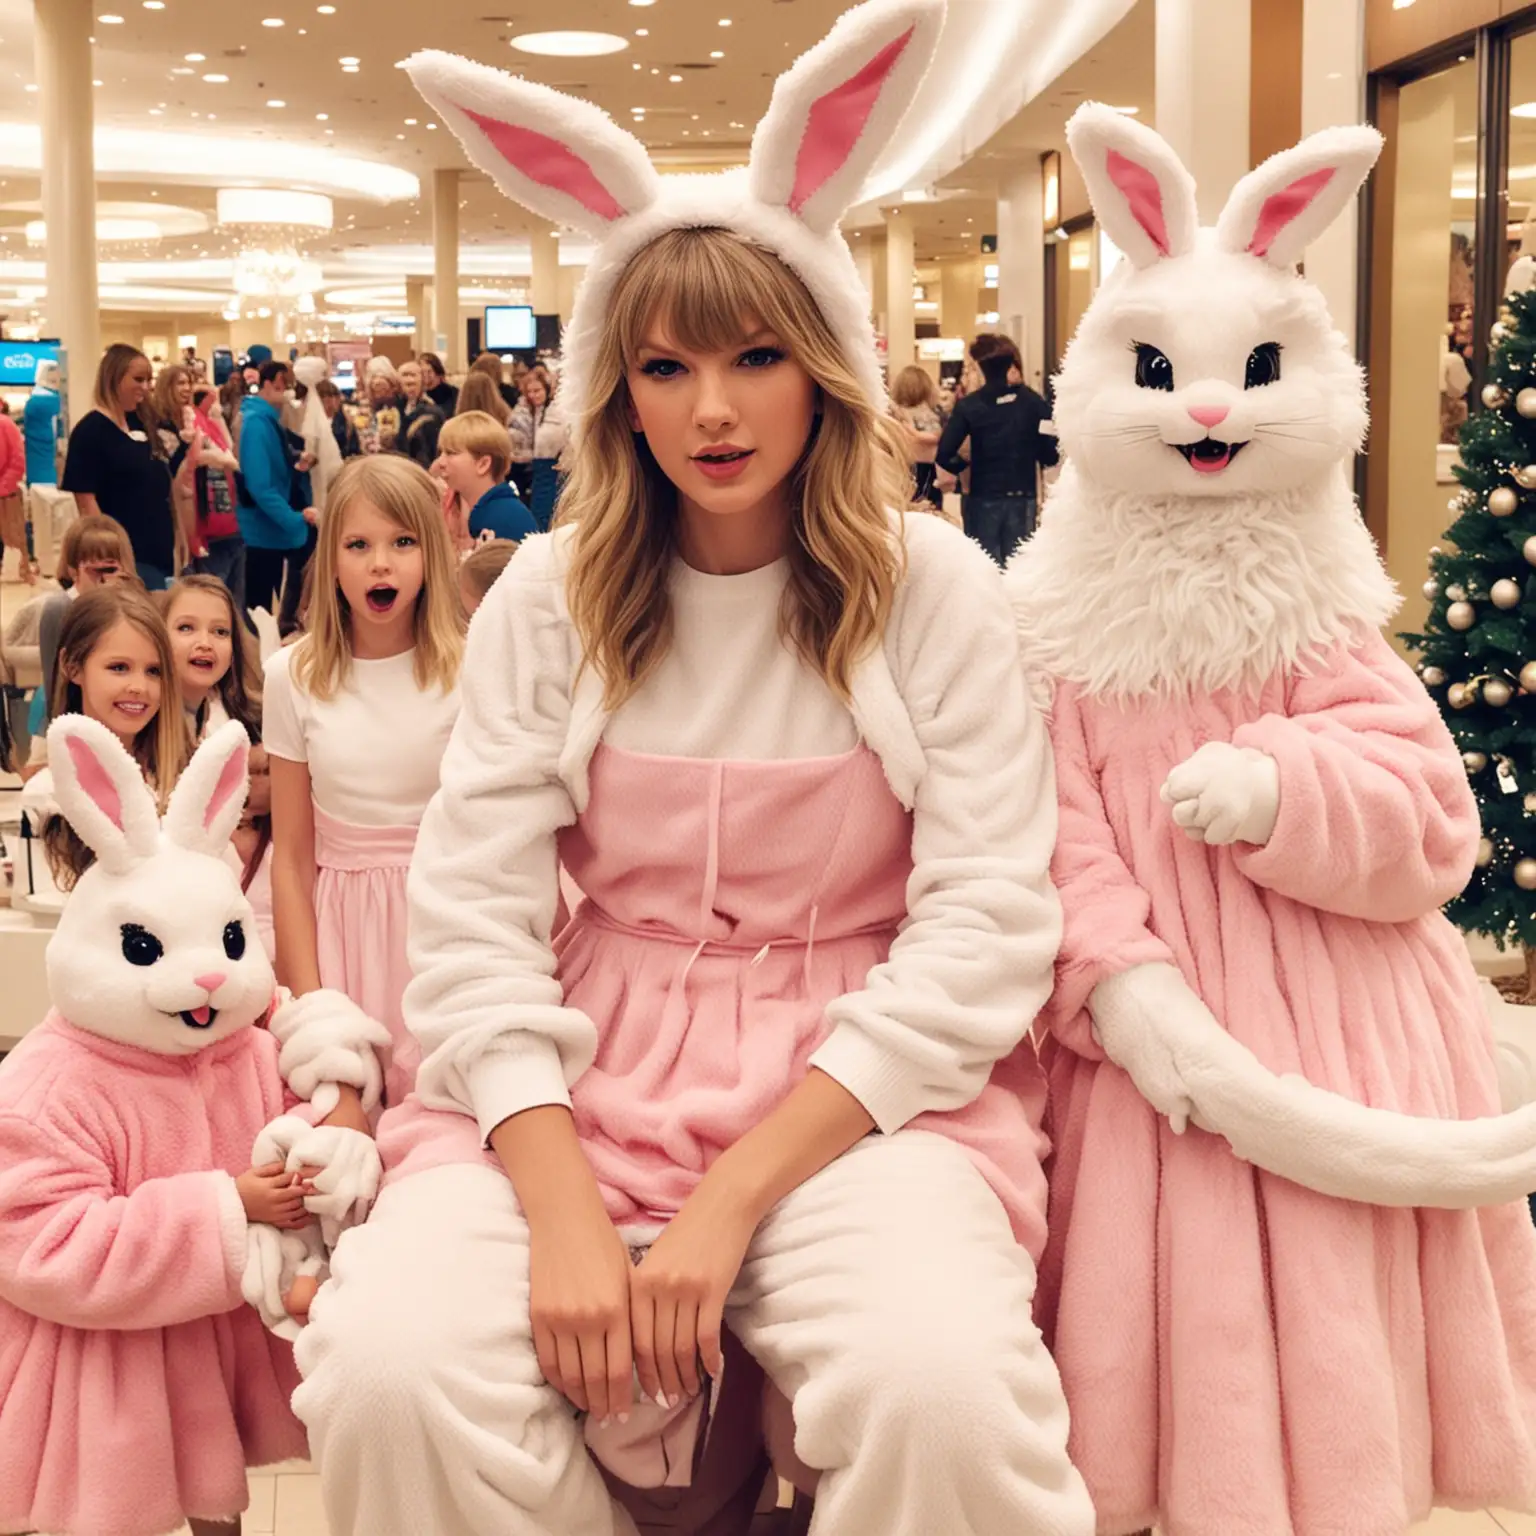 Taylor Swift Mall Easter Bunny Fun and Furry Photoshoot with Kids